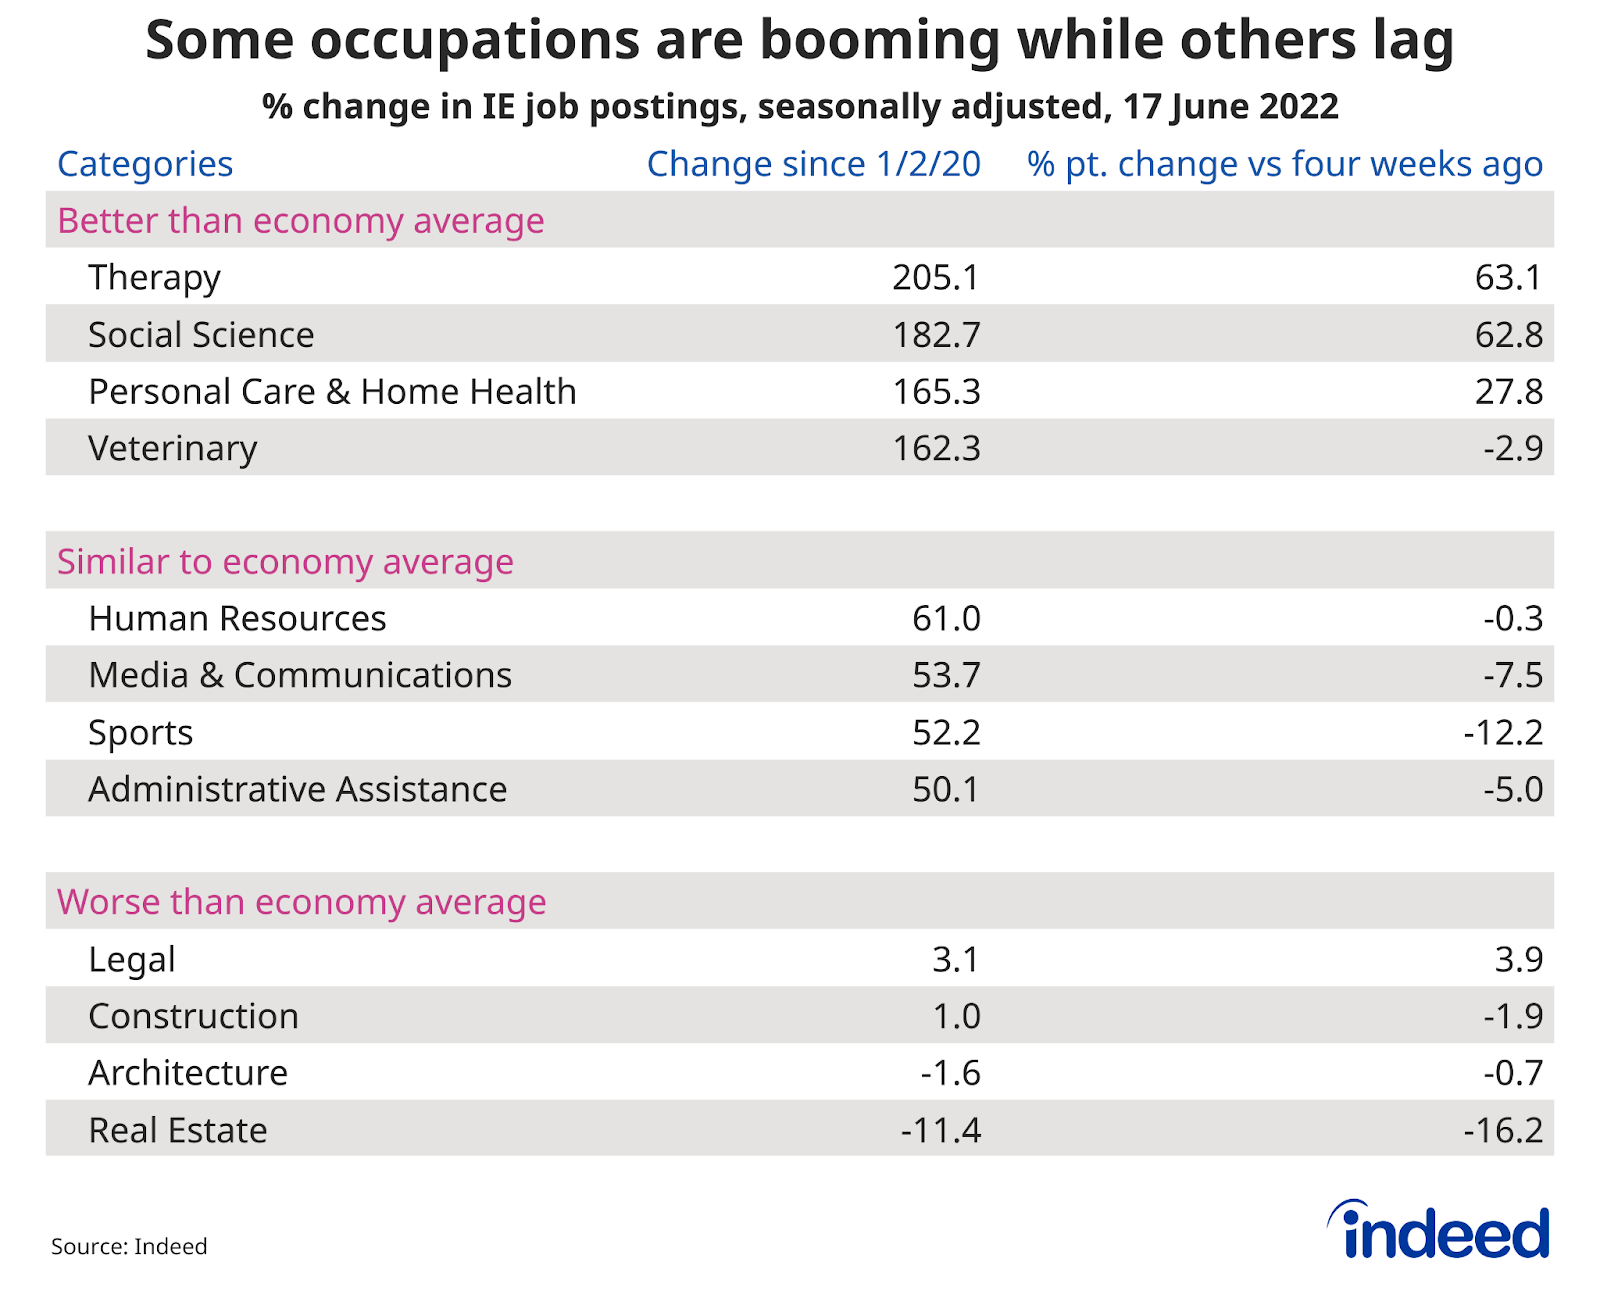 Table titled “Some occupations are booming while others lag.”